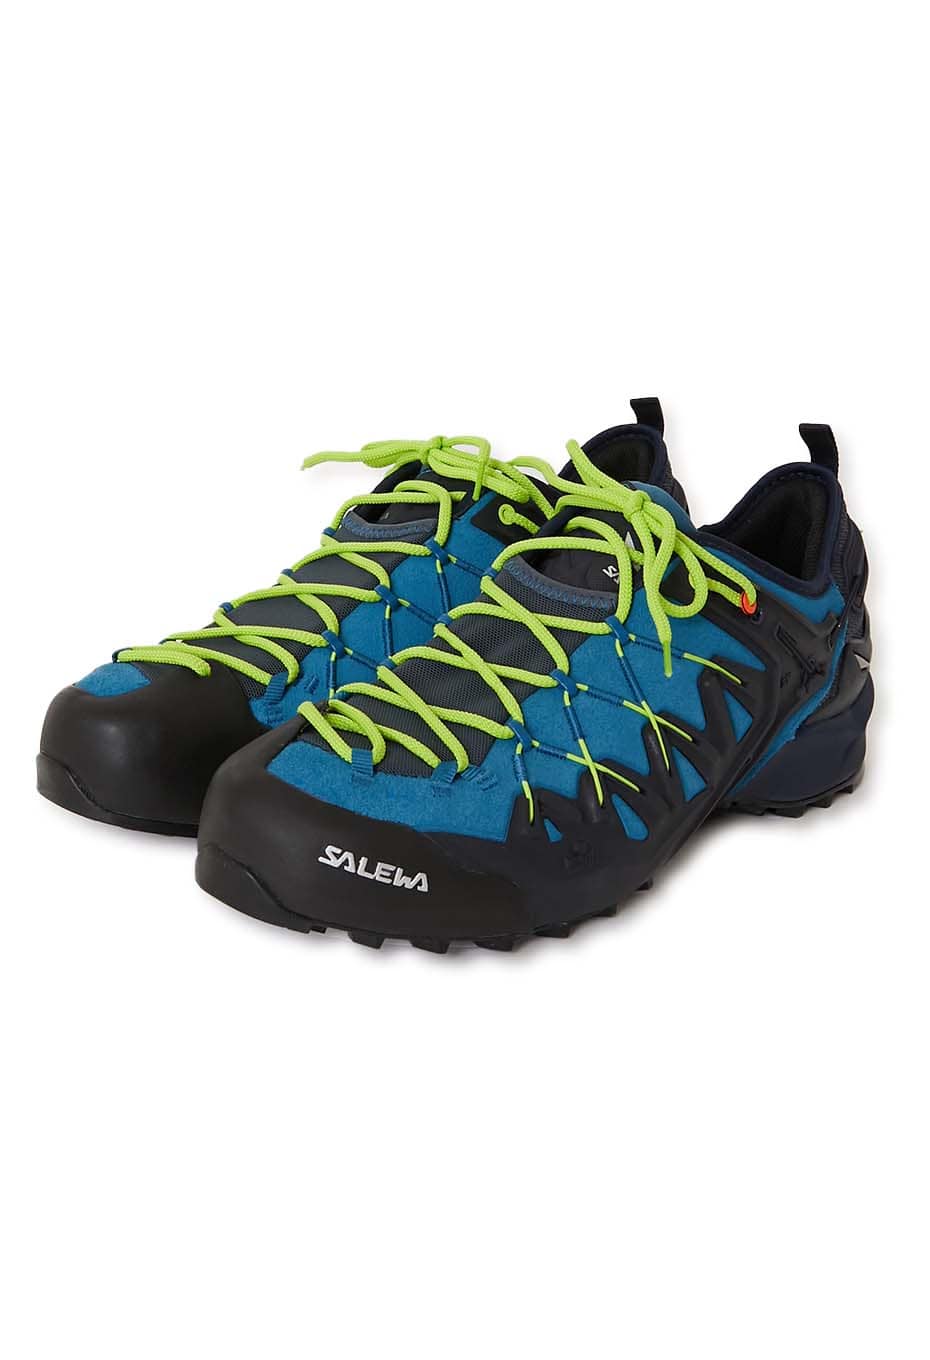 SALEWA MS WILDFIRE EDGE approach shoes